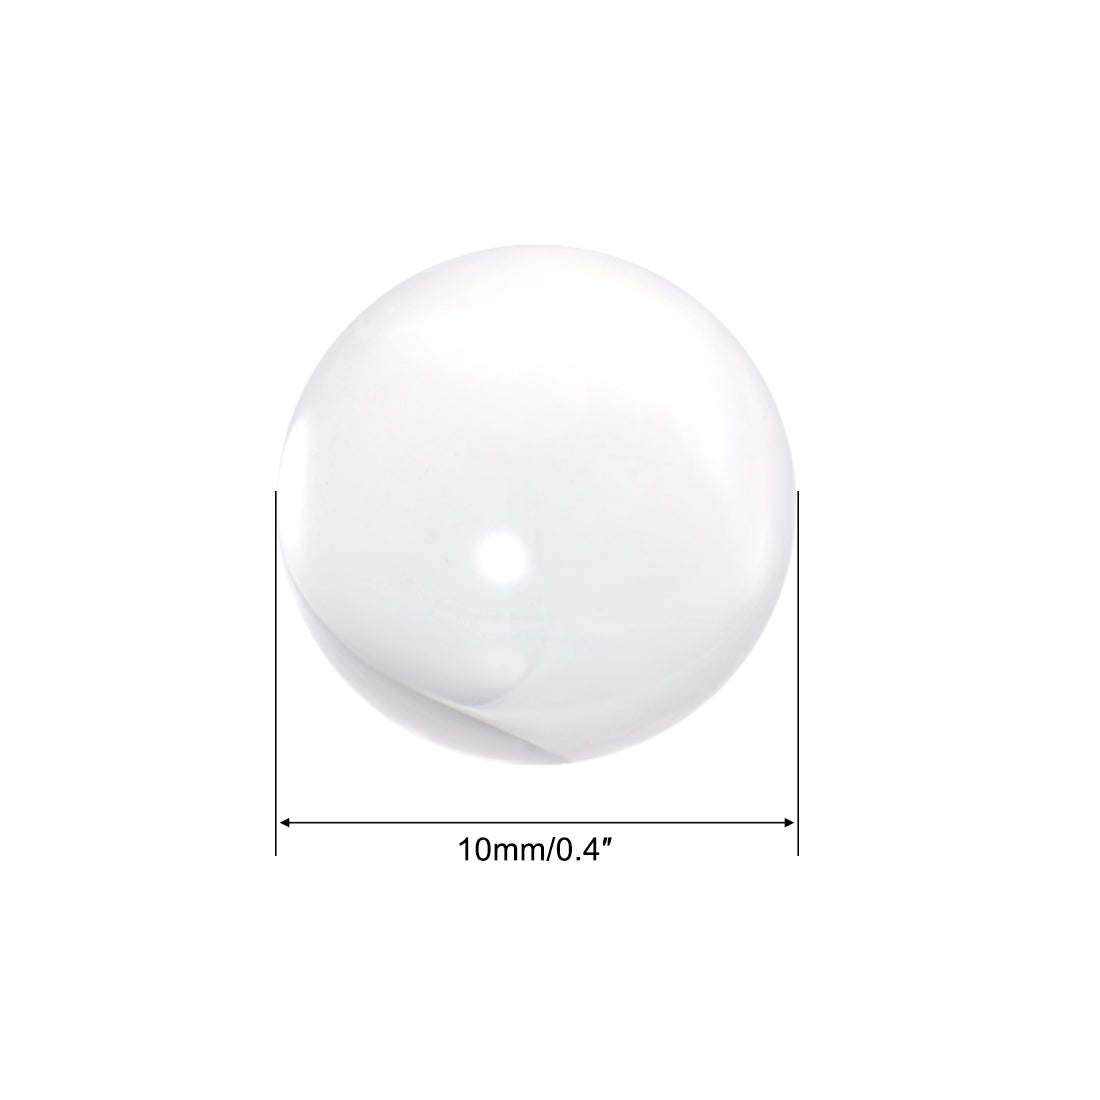 Uxcell Uxcell 35mm Diameter Acrylic Ball Clear/Transparent Sphere Ornament 1.4 Inches 5 Pcs